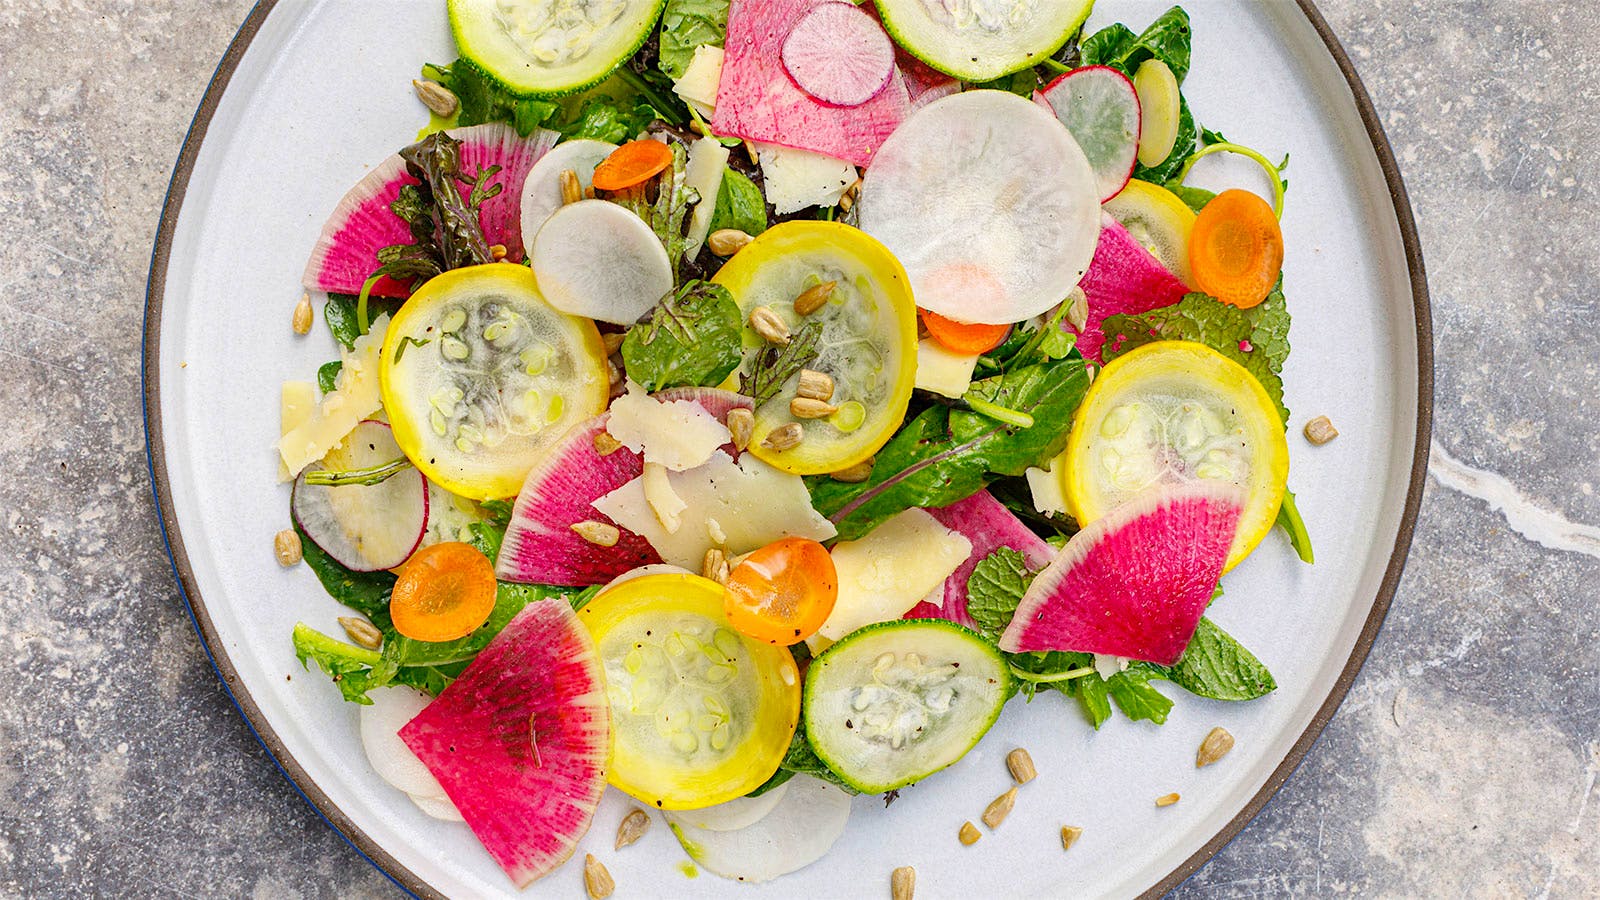 A colorful salad with green and yellow zucchini, radishes, carrots and sunflower seeds